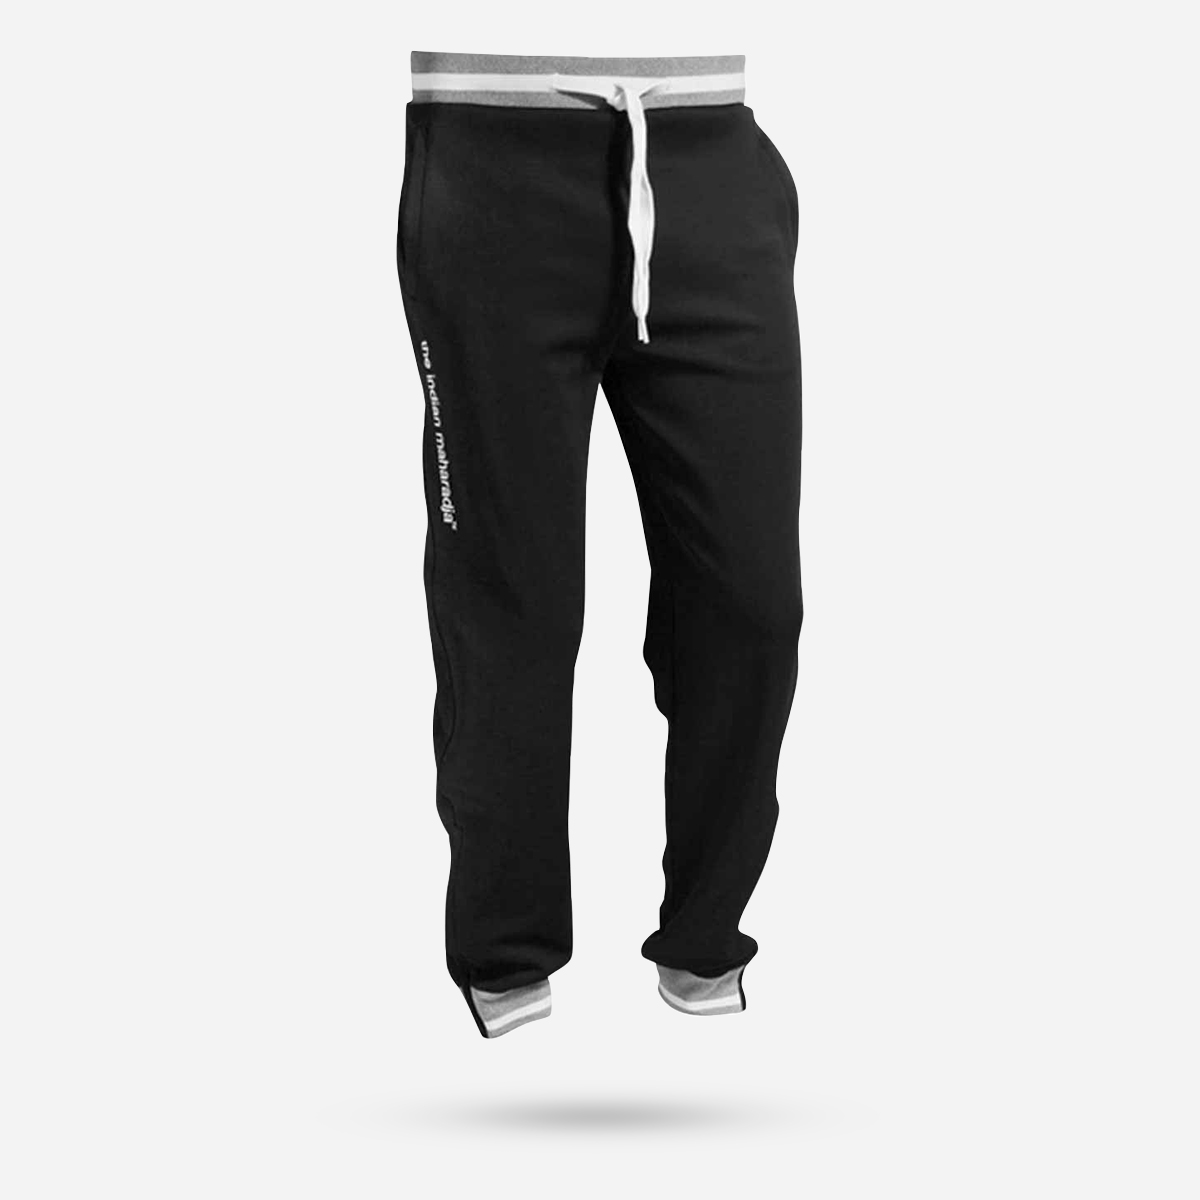 AN229829 Men's Knitted Pant IM